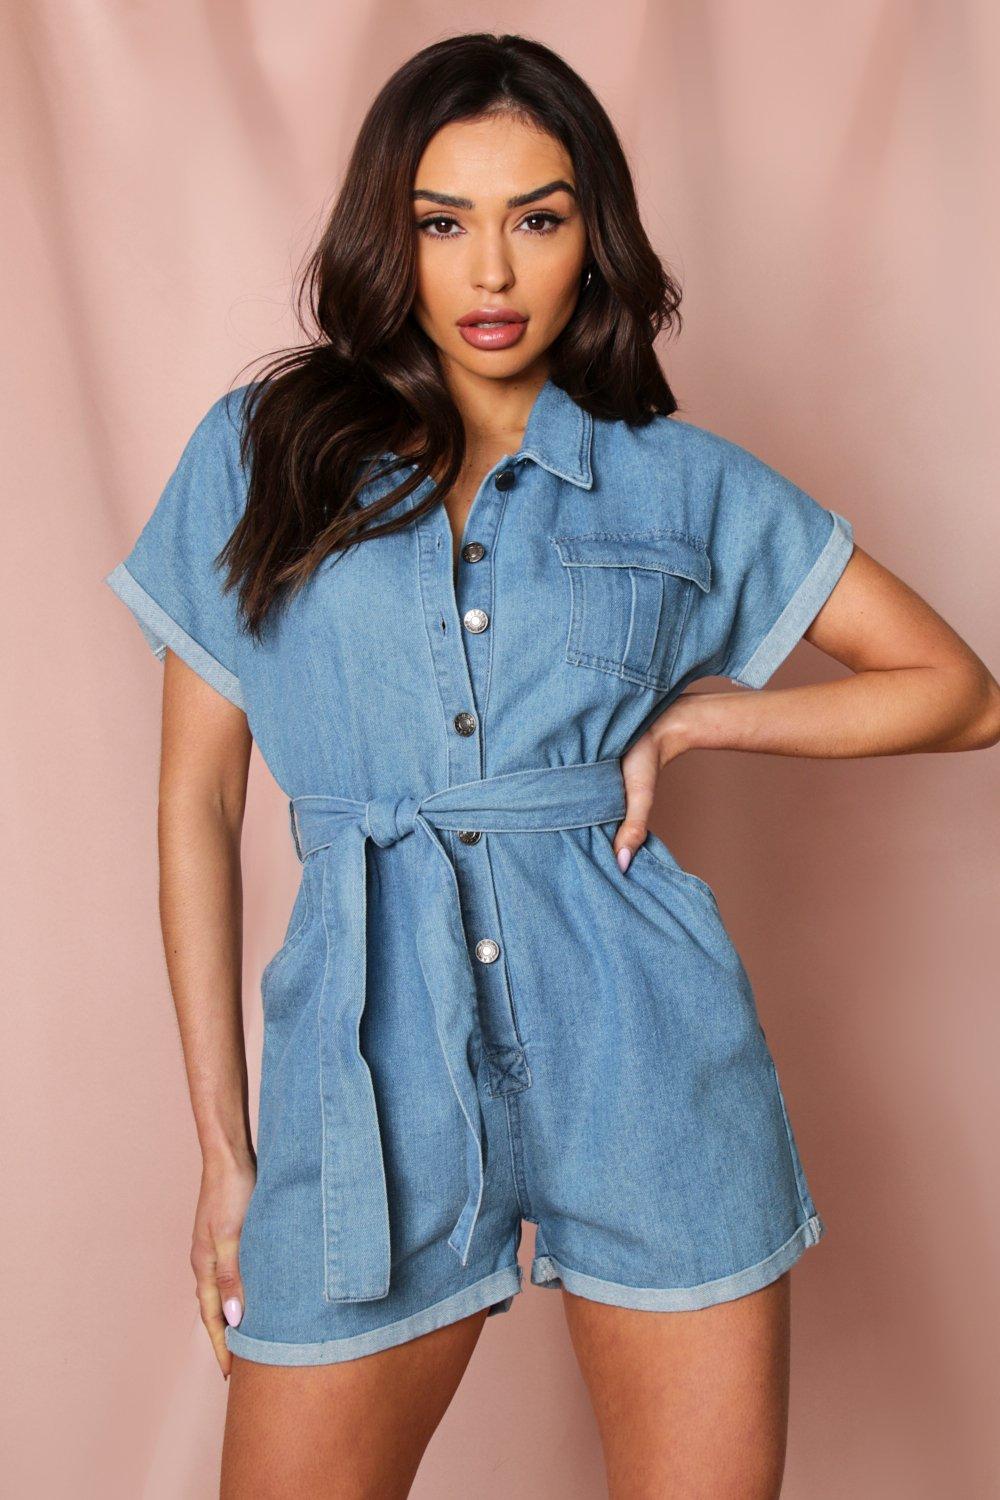 in the style denim playsuit